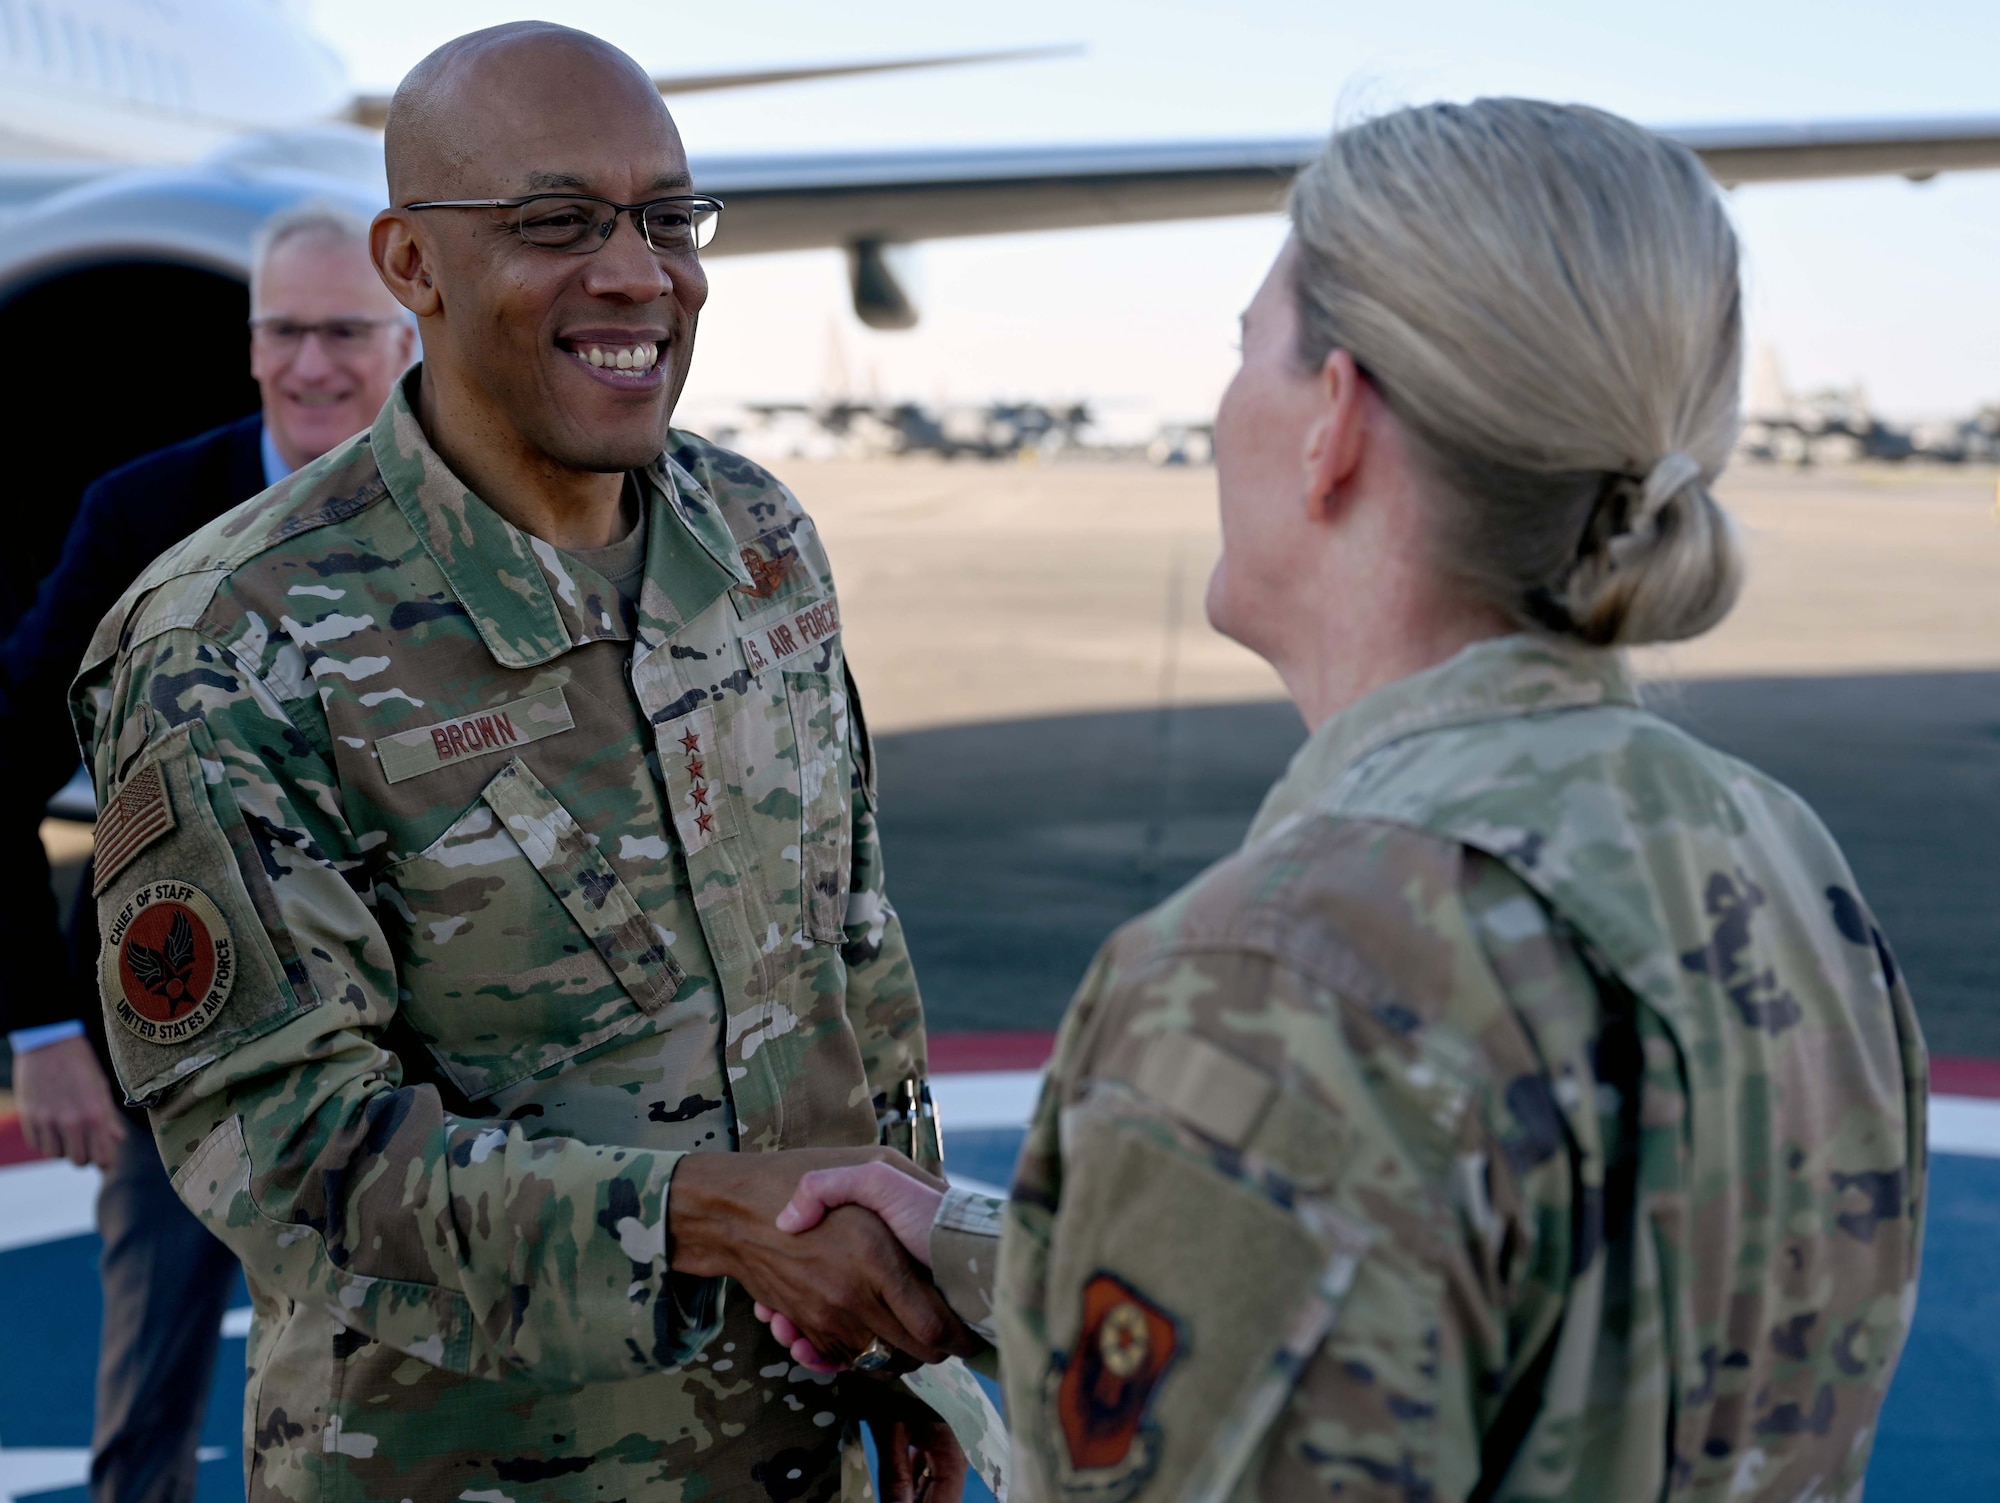 Air Force Chief of Staff Gen. CQ Brown, Jr., greets U.S. Air Force Col. Jocelyn Schermerhorn, commander of the 1st Special Operations Wing, during his visit to Hurlburt Field, Florida, April 4, 2022. Brown’s visit familiarized him with Air Force Special Operation Command’s Force Generation Model to include: Mission Sustainment Teams, Aviation Special Operations Task Units and Special Operations Task Groups. Additionally, Brown held a sensing session with junior enlisted Airmen to discuss challenges faced in the command. (U.S. Air Force photo by Staff Sgt. Brandon Esau)